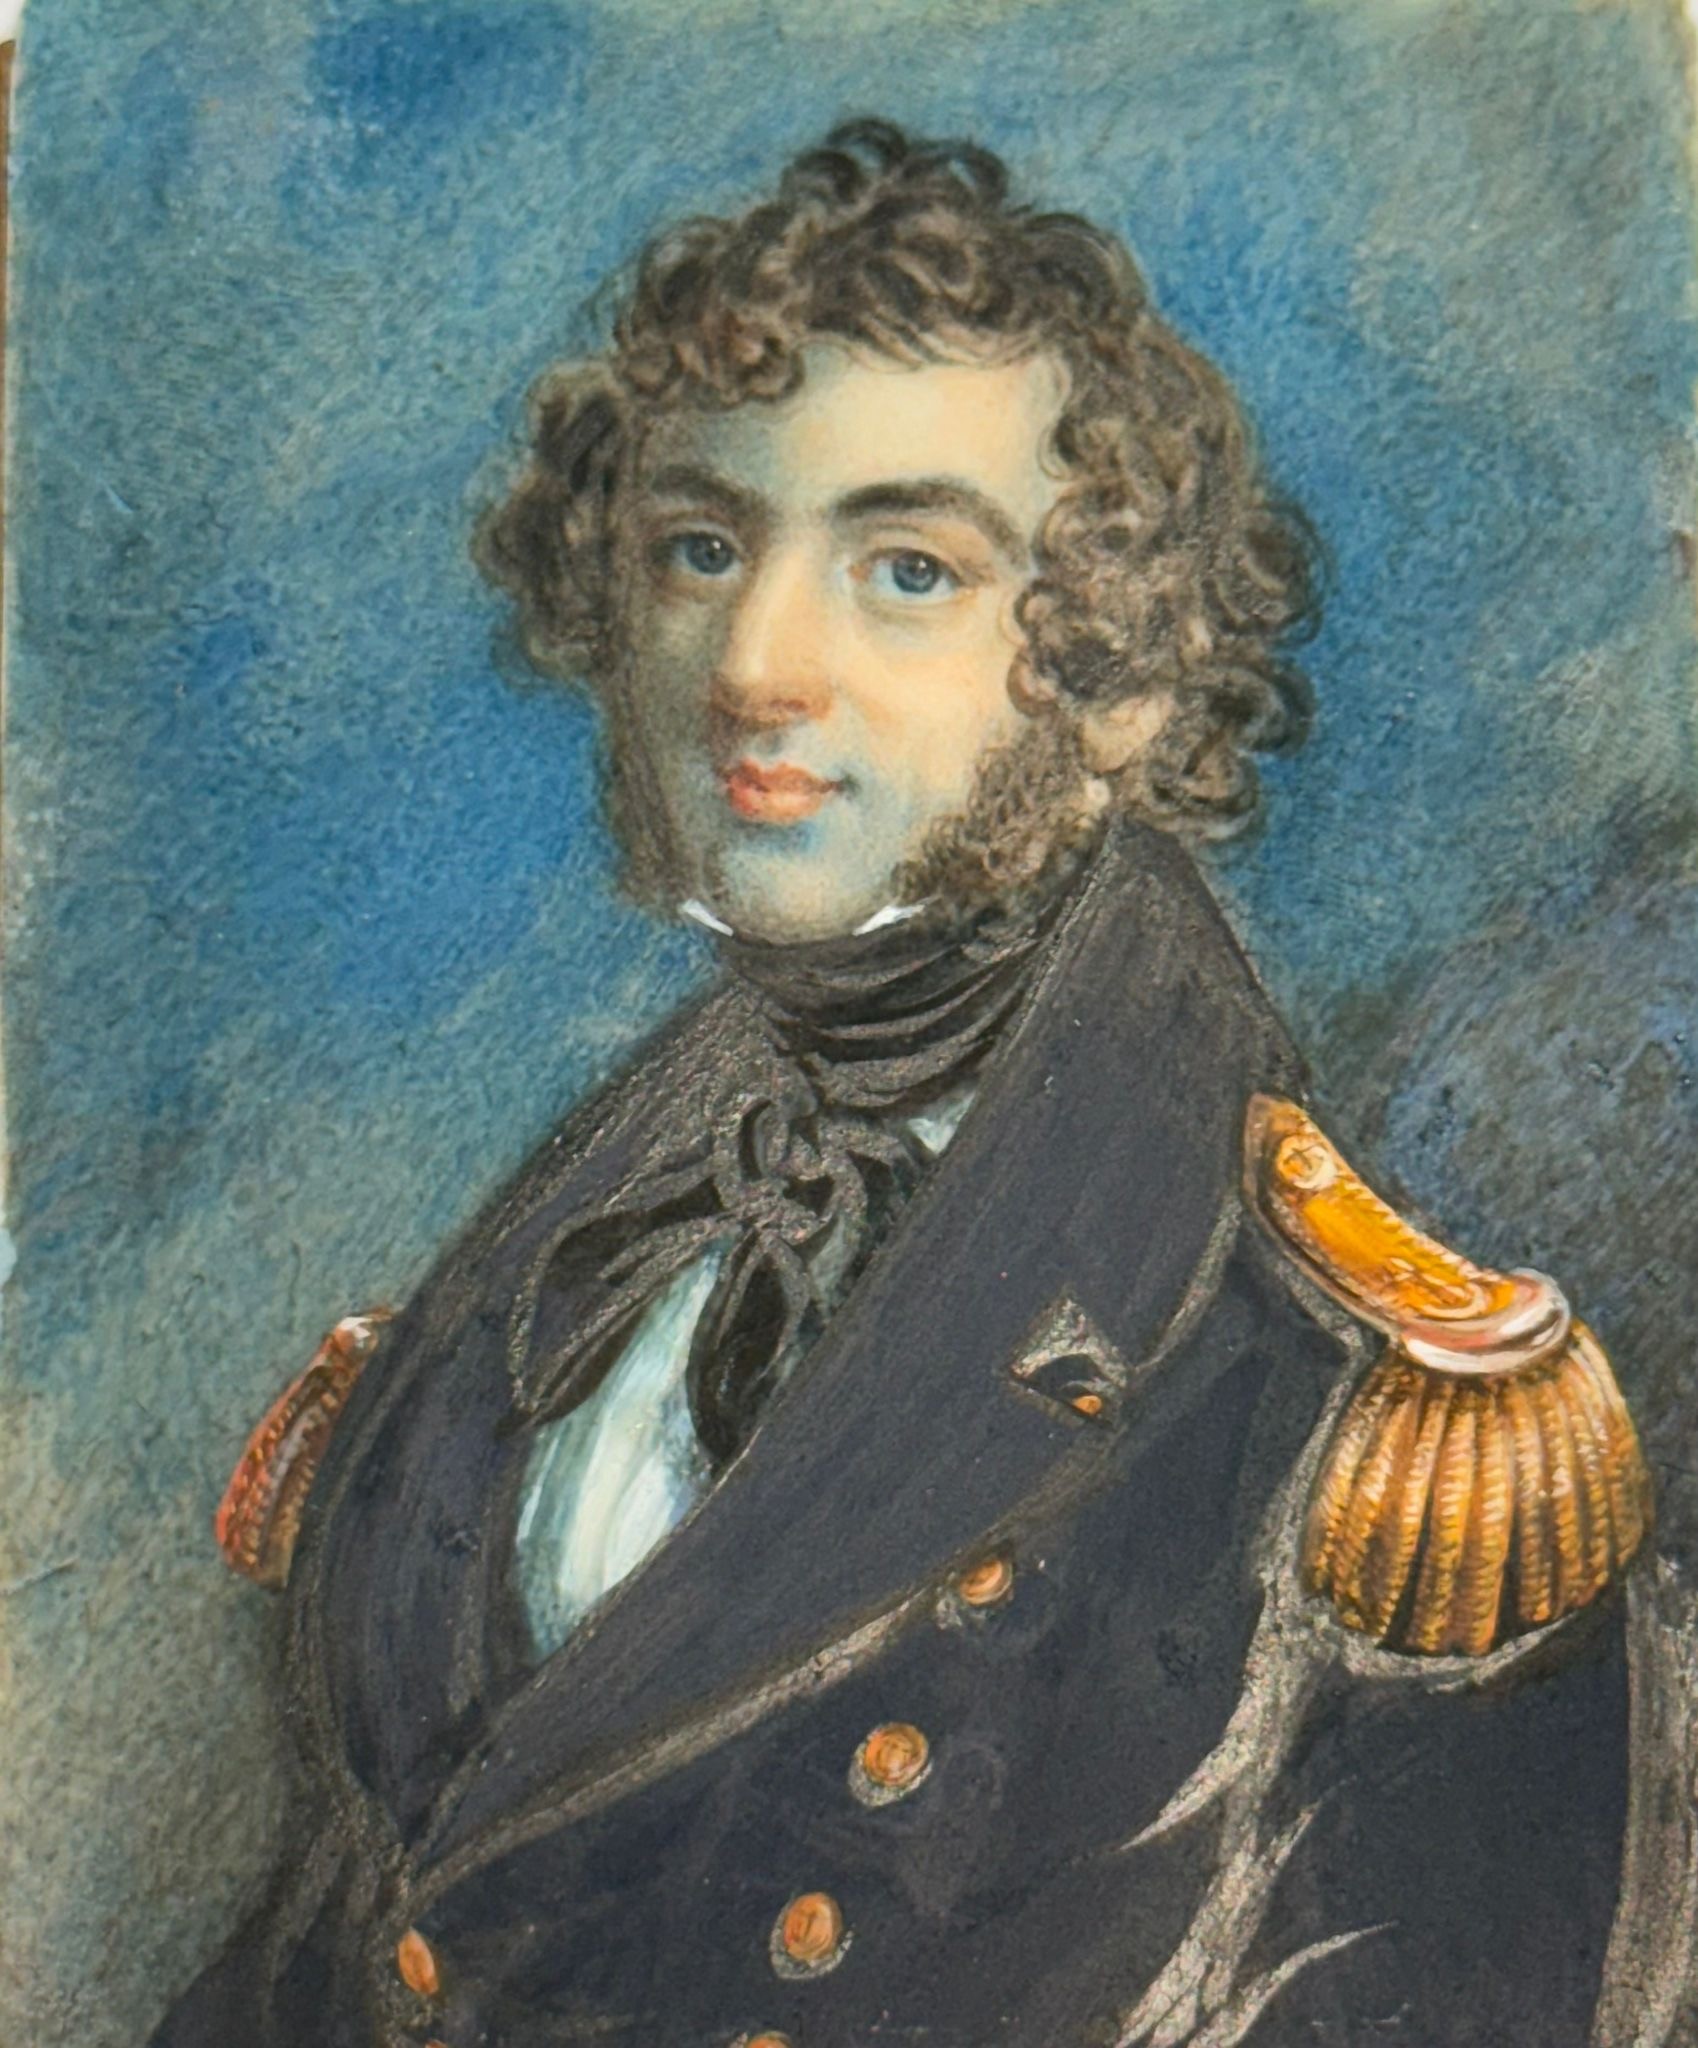 A Mid-19th century portrait miniature of a Naval Commander or Captain, with long curly brown hair - Image 2 of 7